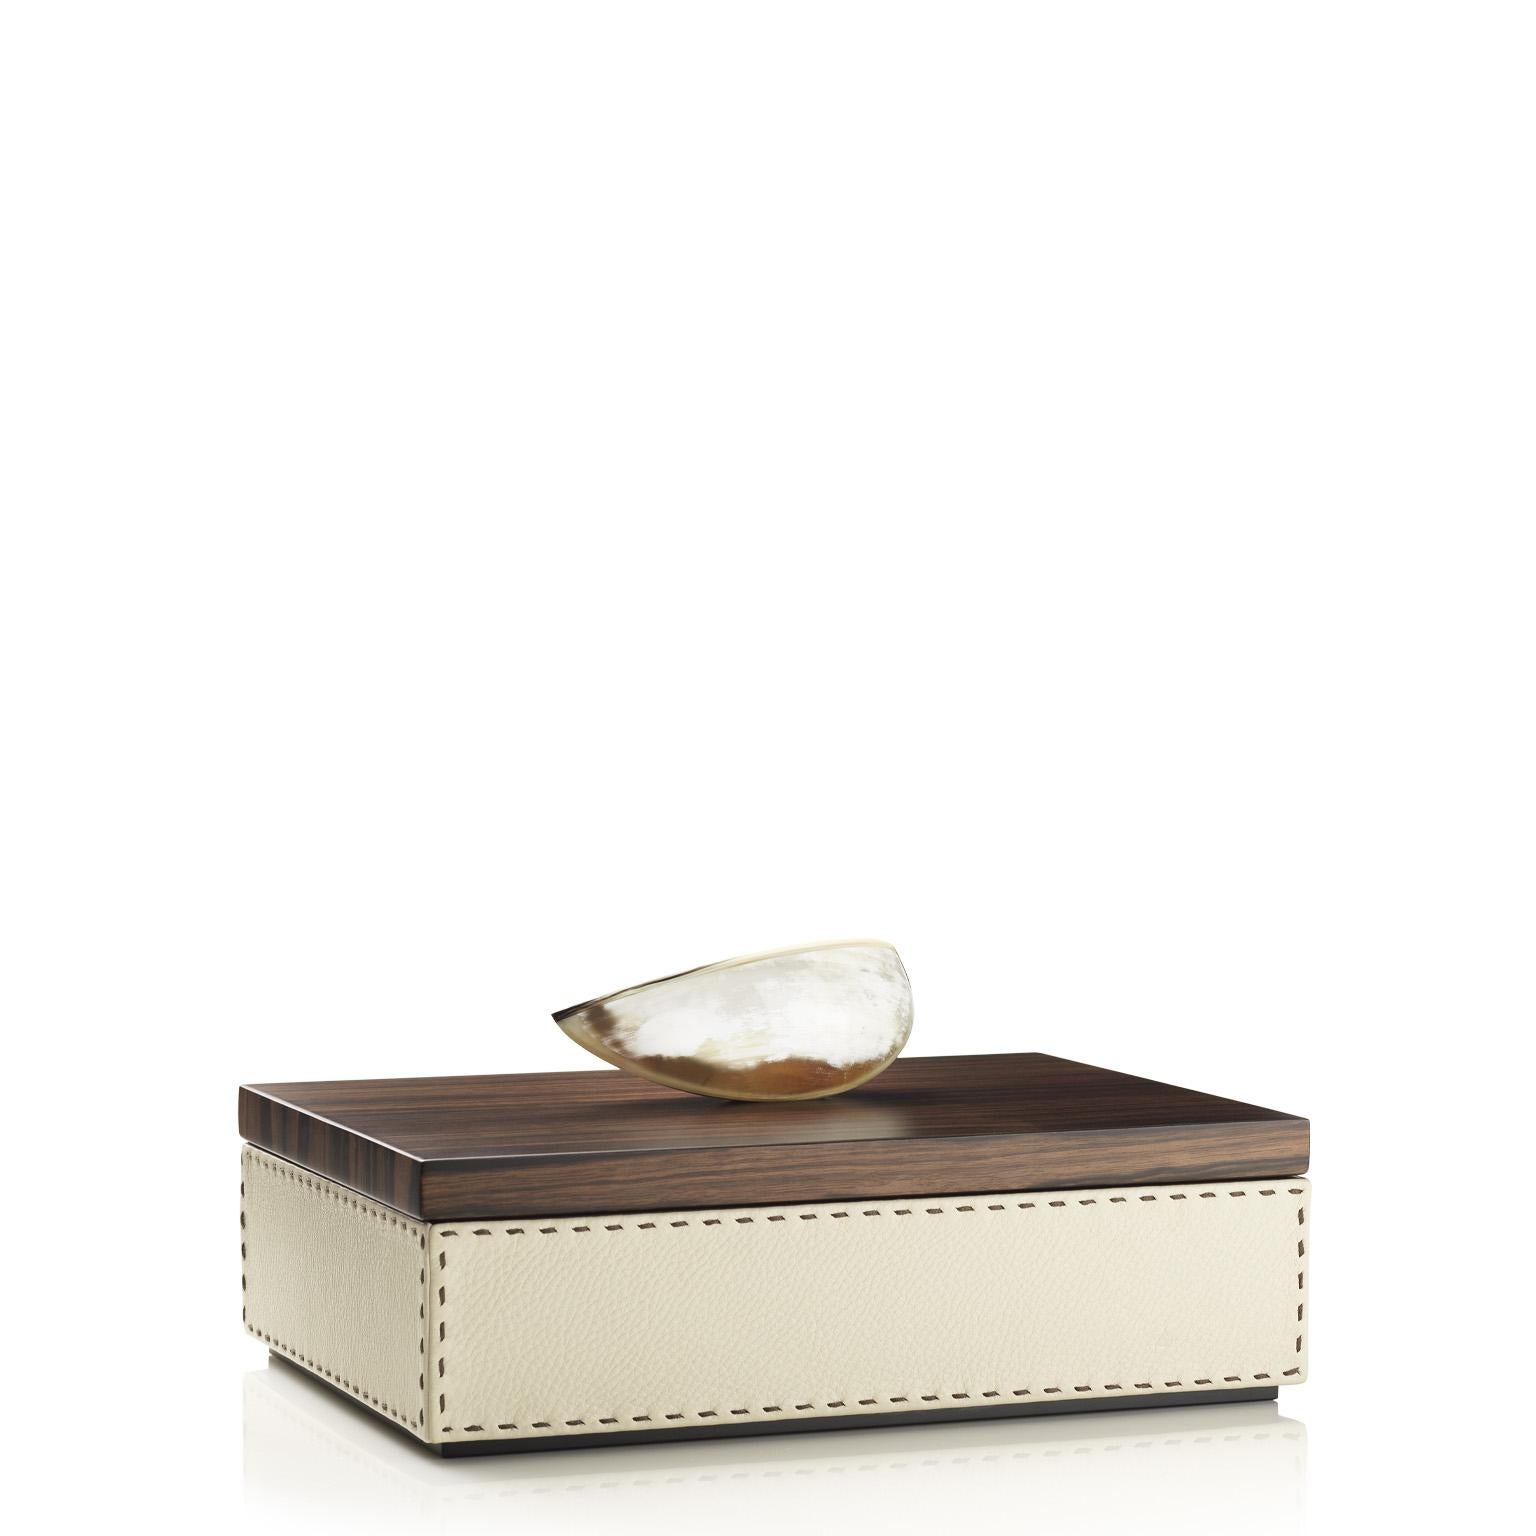 Befitting of all decor, the Capricia rectangular box will be a unique addition to your vanity station or to any other place in your home and office. Clad in Aida pebbled leather in a natural Ice-cream colour, Capricia sports a dark brown handmade